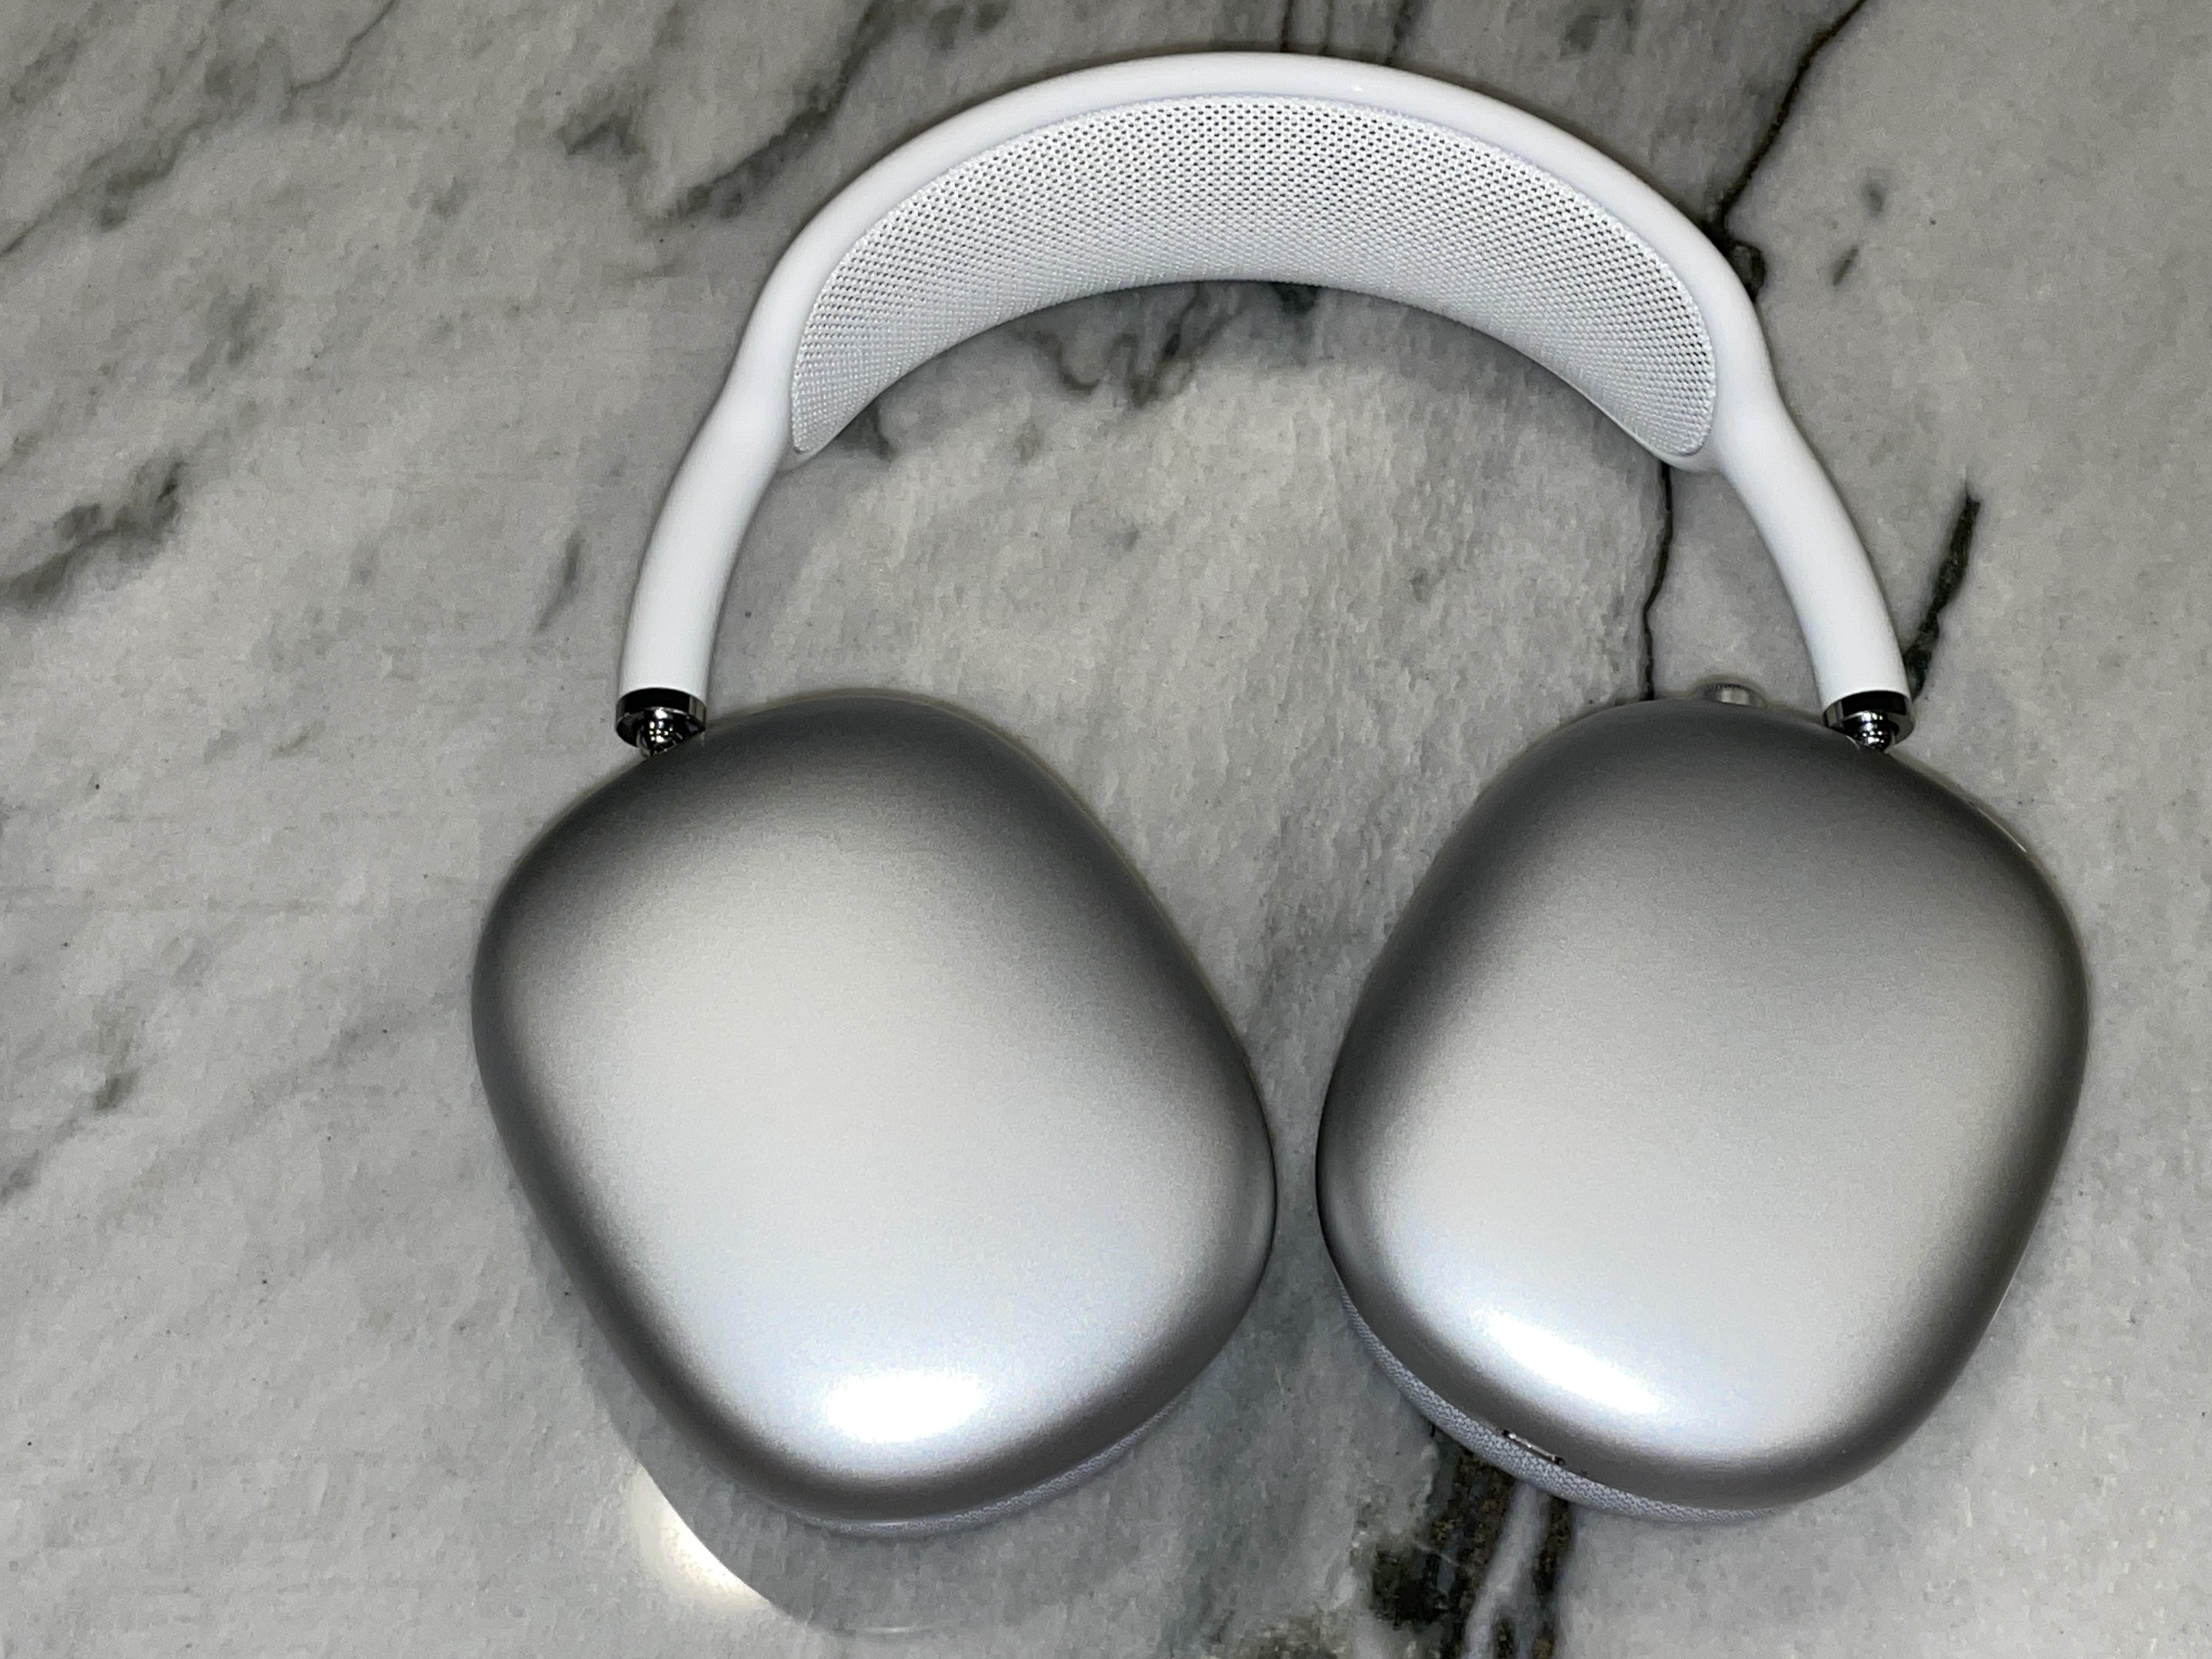 This is not a review of Apple's new AirPods Max headphones